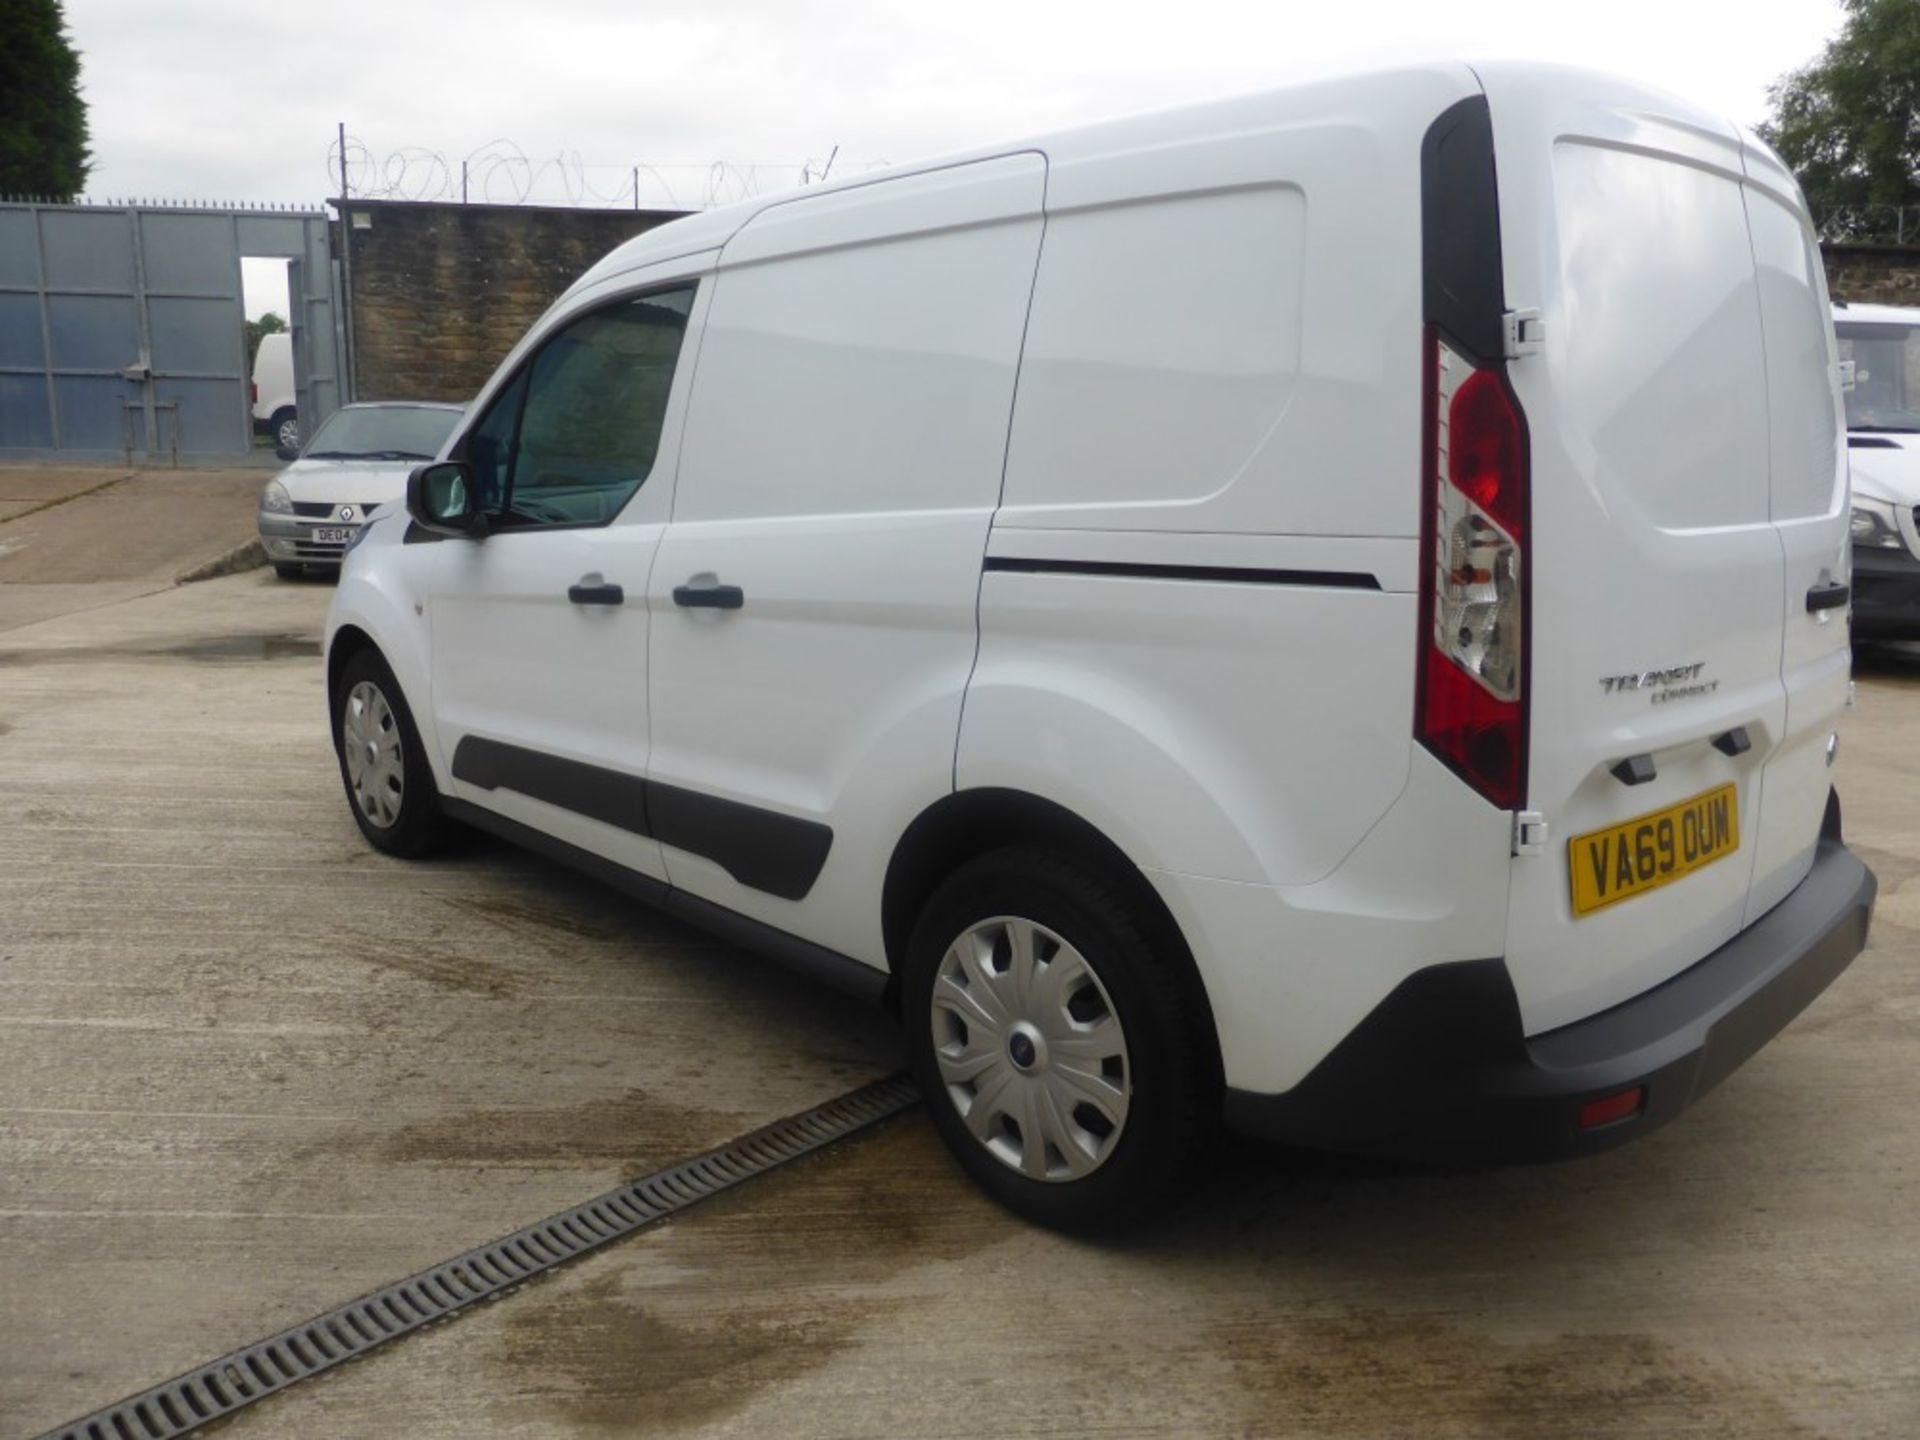 69 reg FORD TRANSIT CONNECT 220 TREND TDCI (LOCATION PADIHAM) 1ST REG 01/20, 207.9 MILES, PLY LINED, - Image 4 of 8